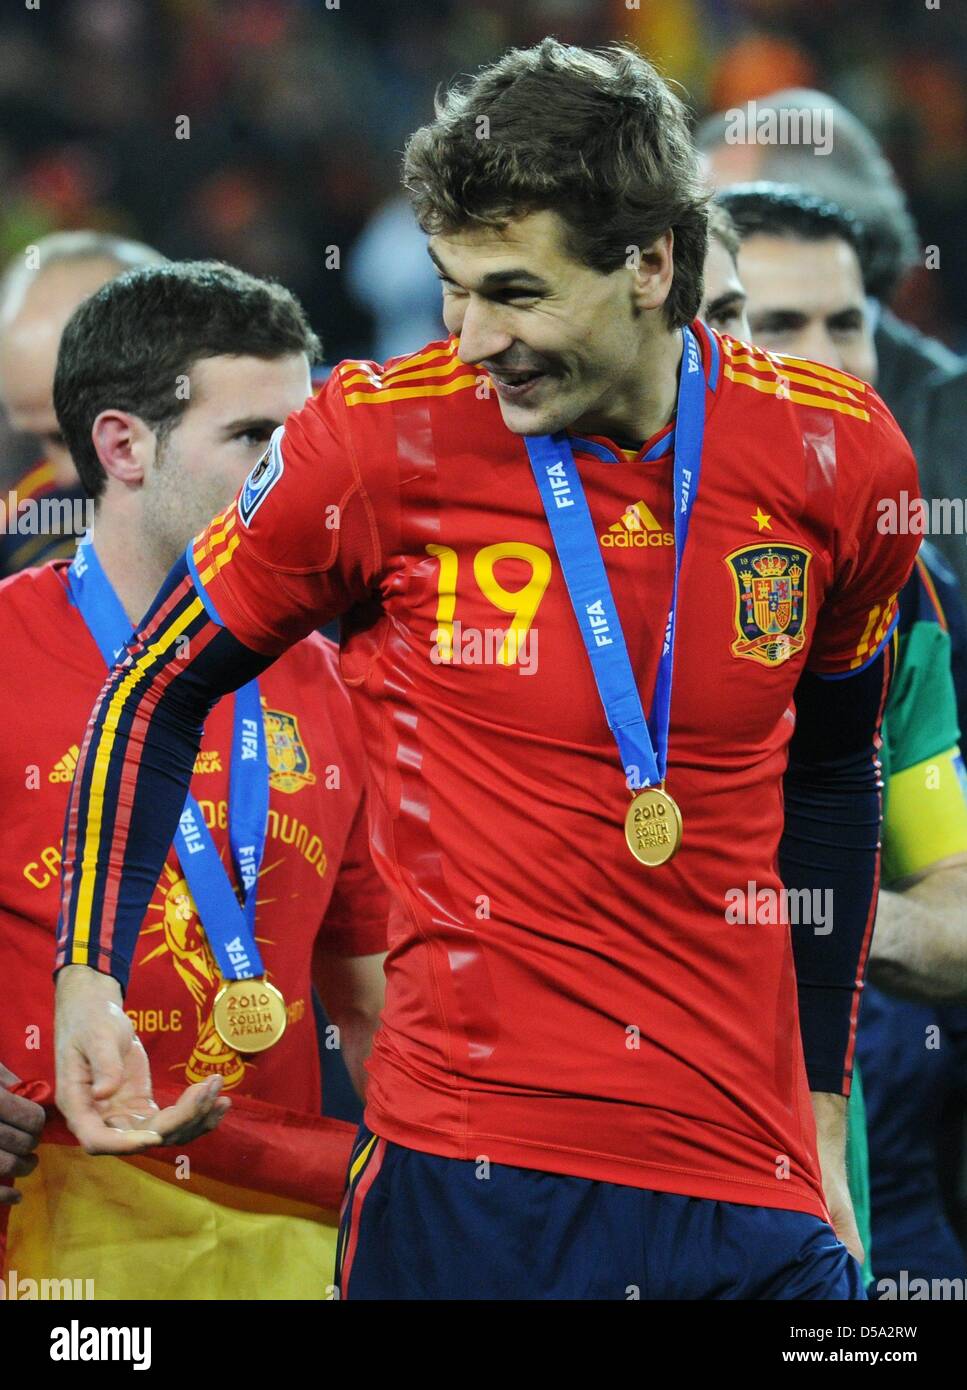 Fernando Llorente of Spain celebrates after the final whistle of the 2010 FIFA World Cup final match between the Netherlands and Spain at the Soccer City Stadium in Johannesburg, South Africa 11 July 2010. Photo: Bernd Weissbrod dpa - Please refer to http://dpaq.de/FIFA-WM2010-TC Stock Photo